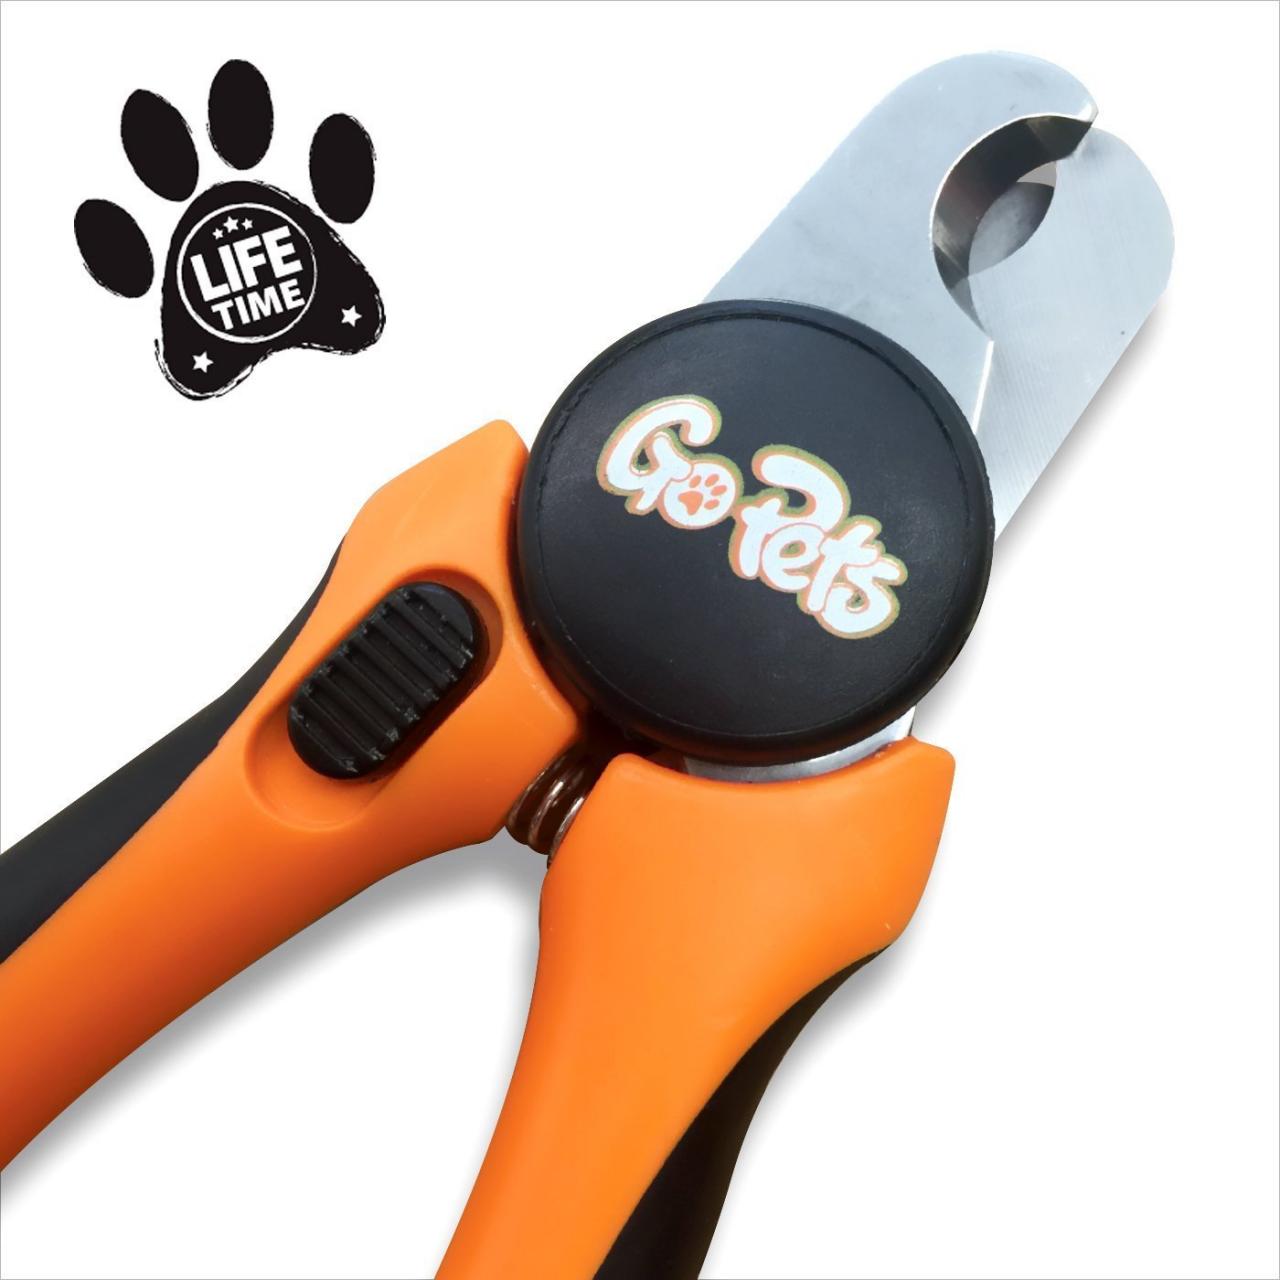 Top 5 Best Dog Nail Clippers